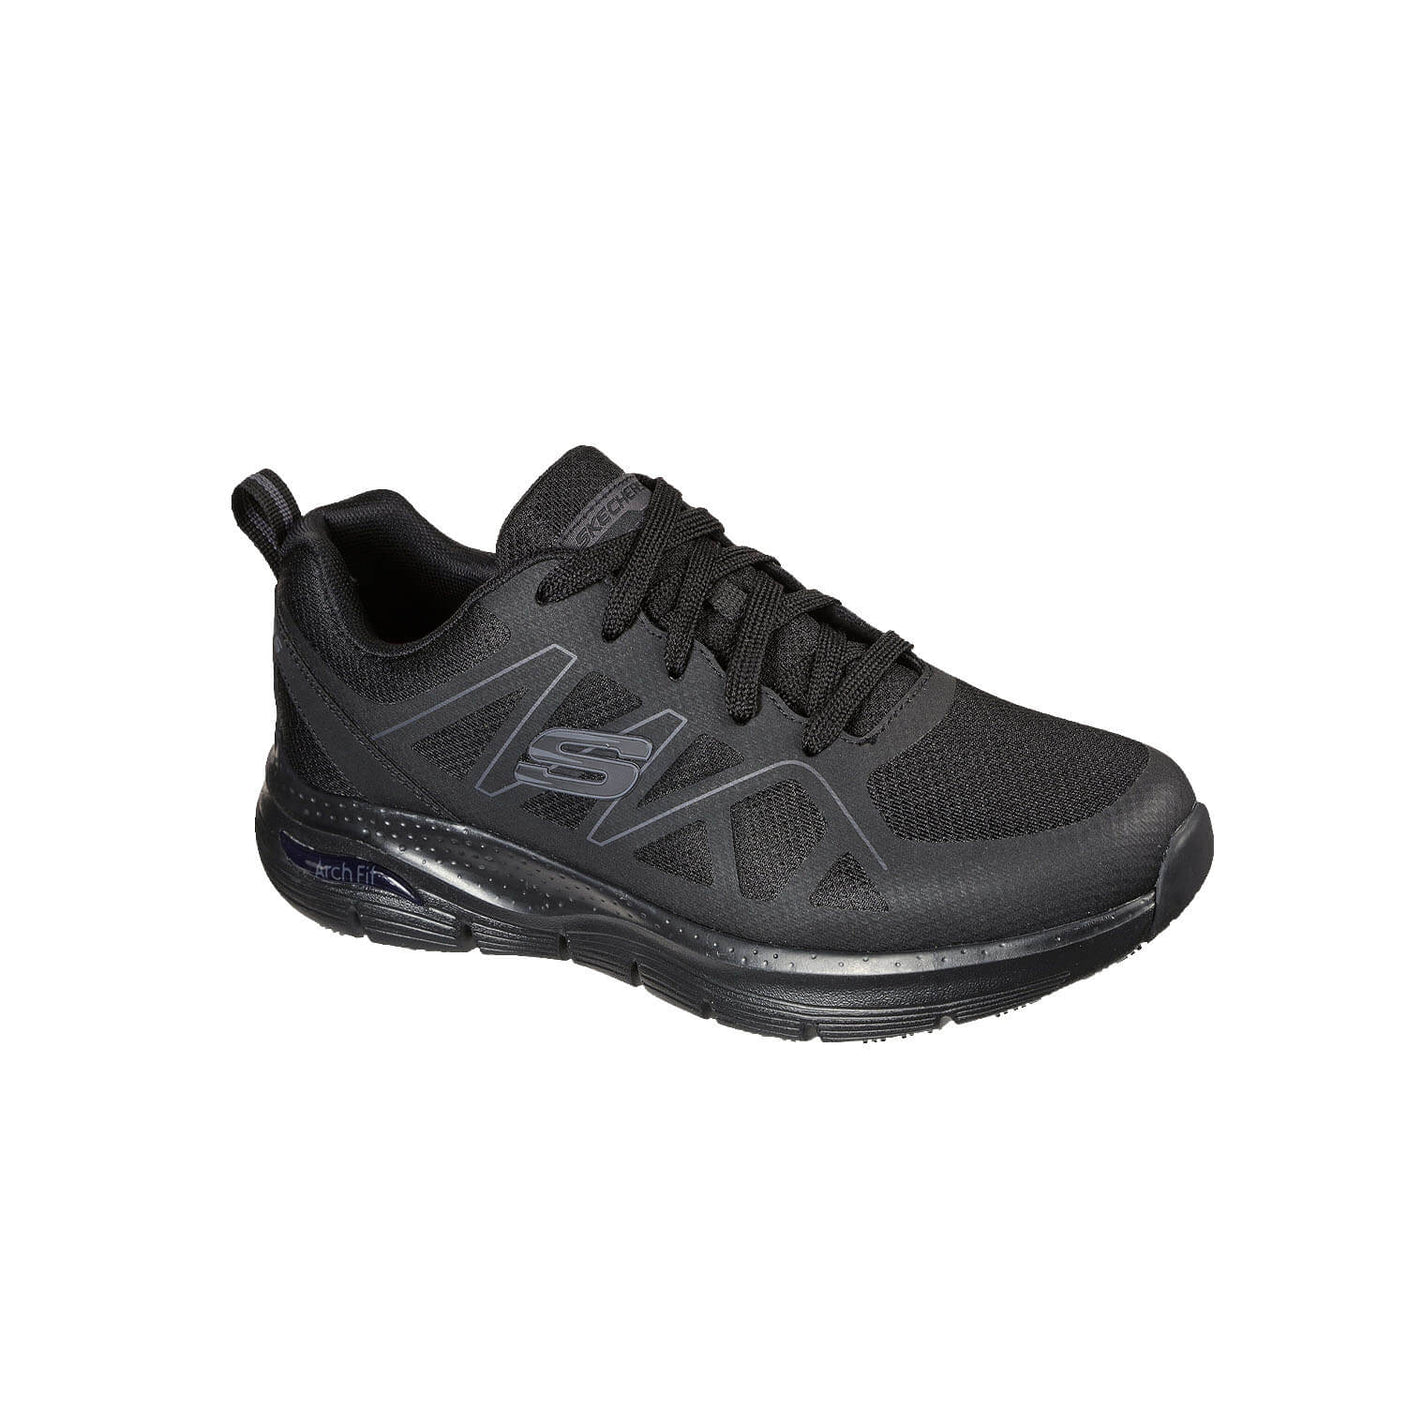 Skechers Axtell Arch Fit Slip-Resistant Shoe 200025-2